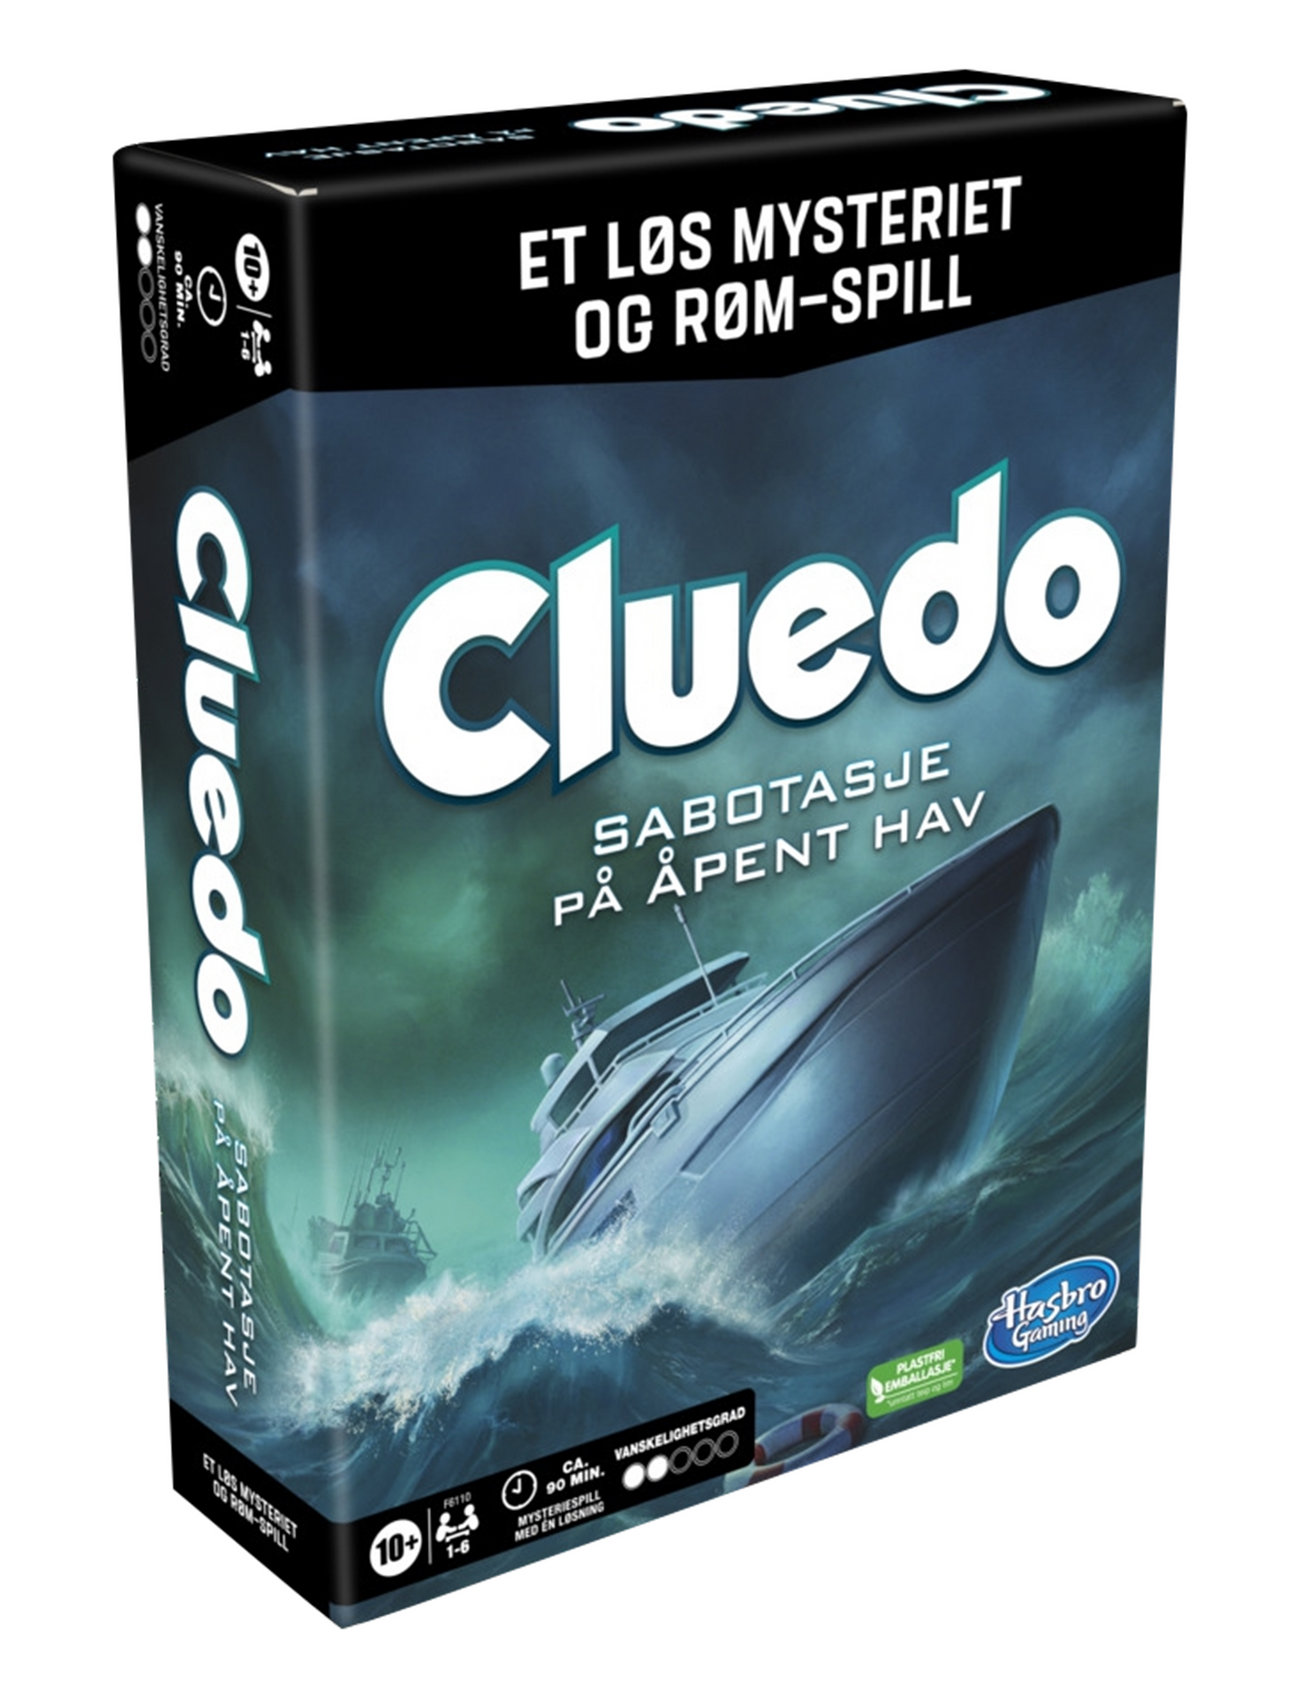 Cluedo Sabotage On The High Seas Toys Puzzles And Games Games Board Games Multi/patterned Hasbro Gaming